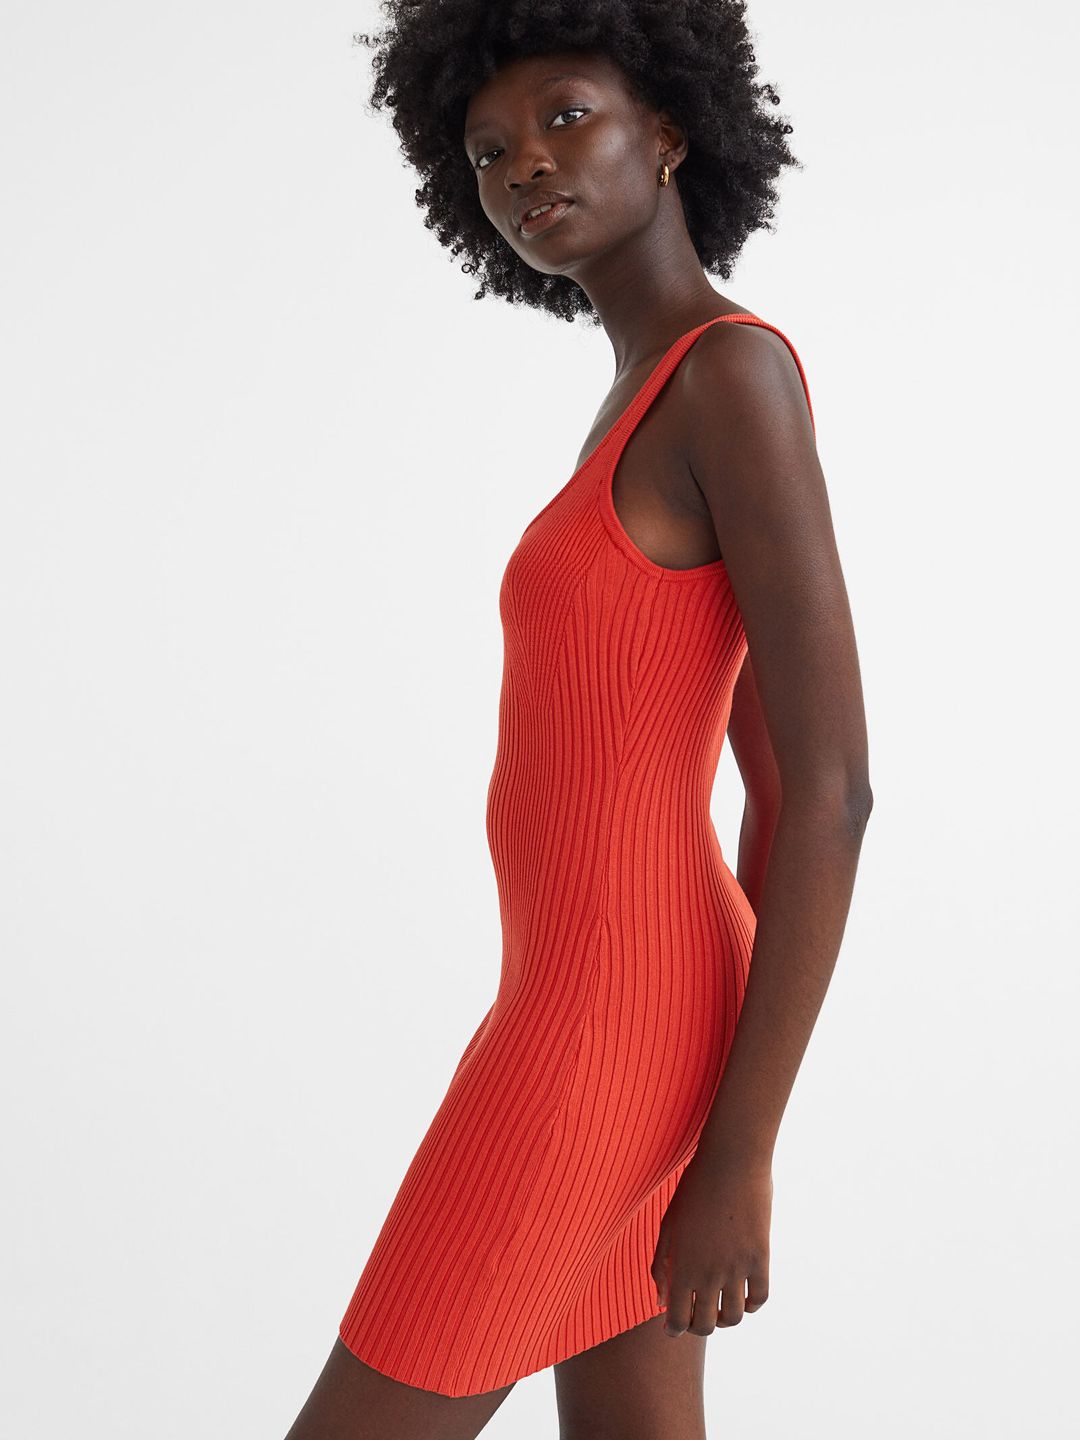 H&M Red Rib-Knit Bodycon Dress Price in India